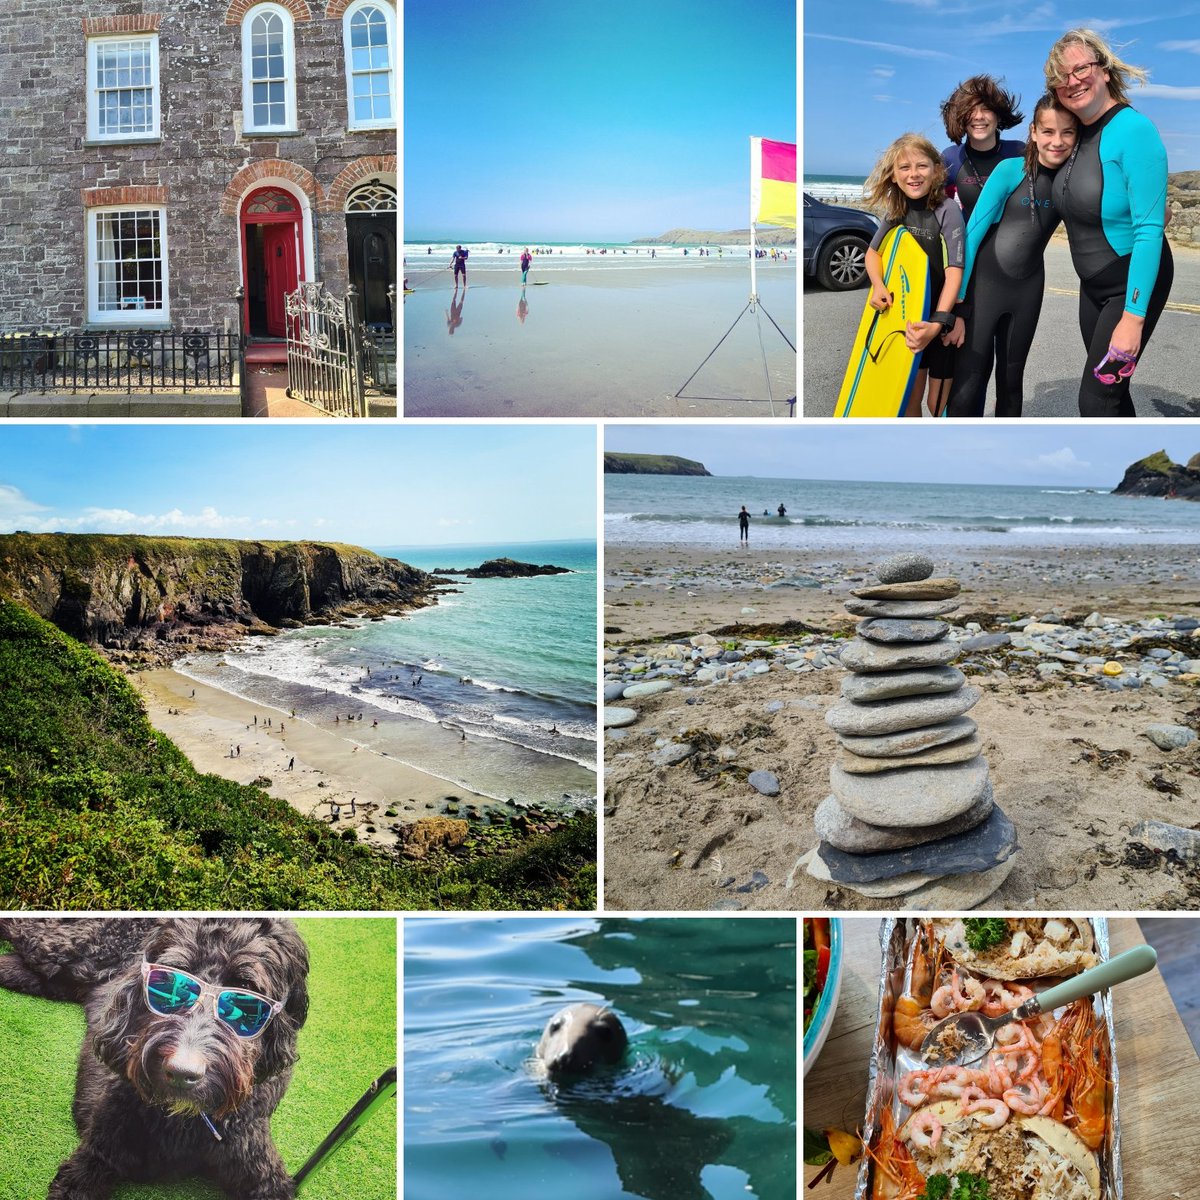 Adventures from our @EscapesSt house in St Davids. Beaches, coastal paths, chillaxin, seals and great food and drink. @VisitPembs @visitstdavids @PembsCoast